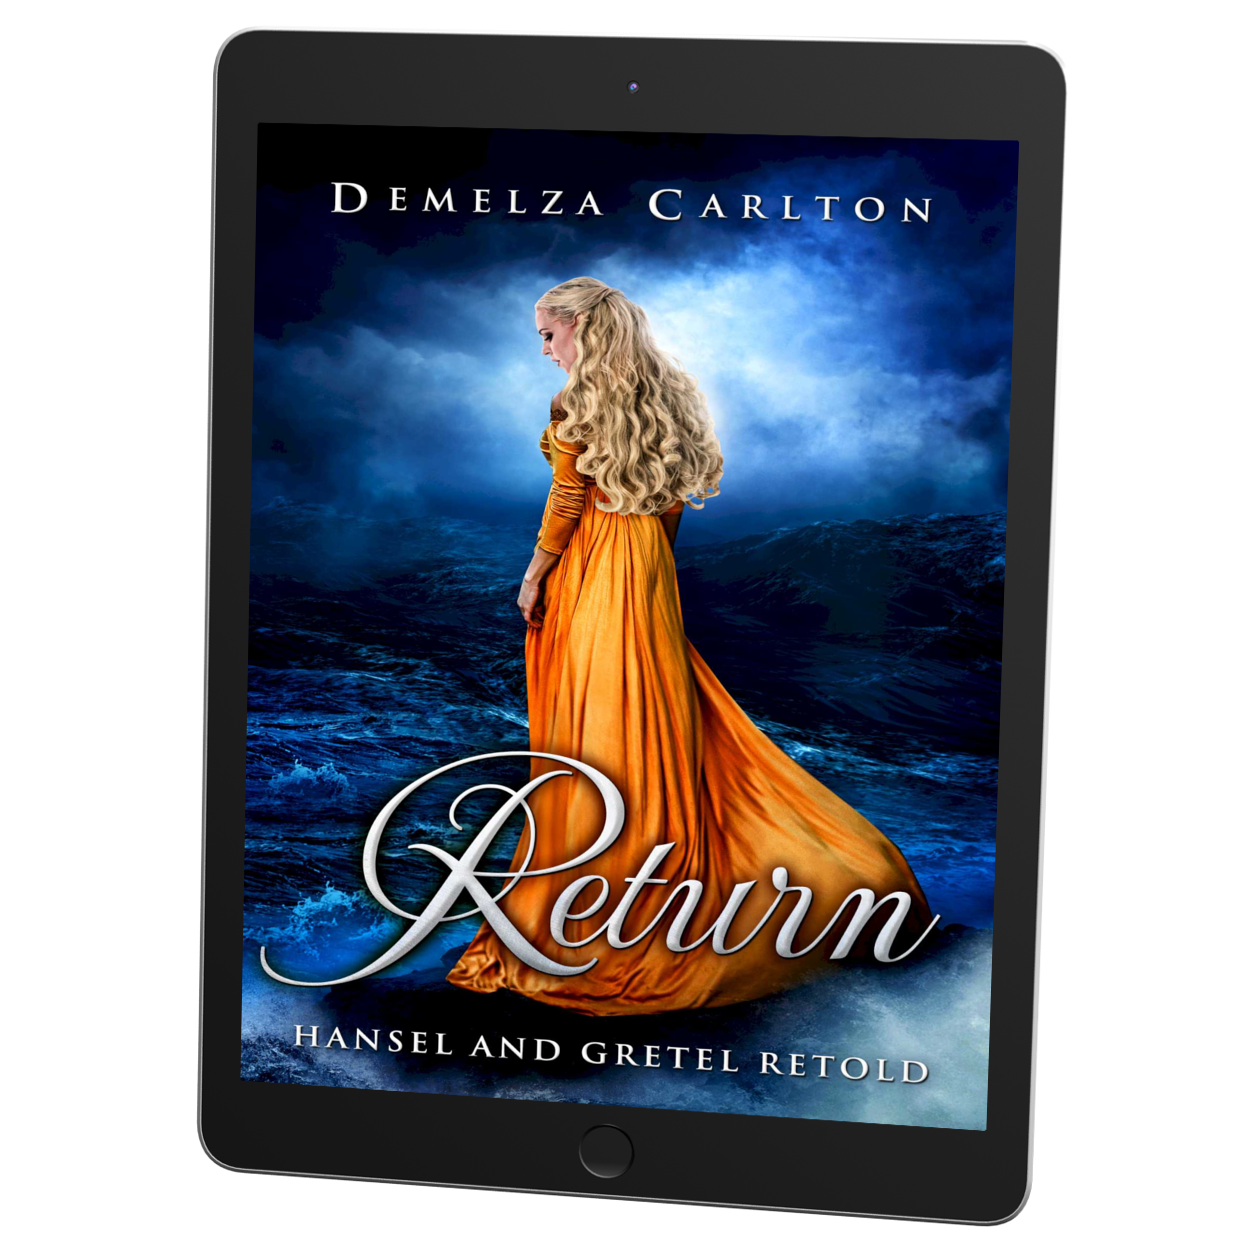 Return: Hansel and Gretel Retold Book 10 in the Romance a Medieval Fairytale series by USA Today Bestselling Author Demelza Carlton ebook